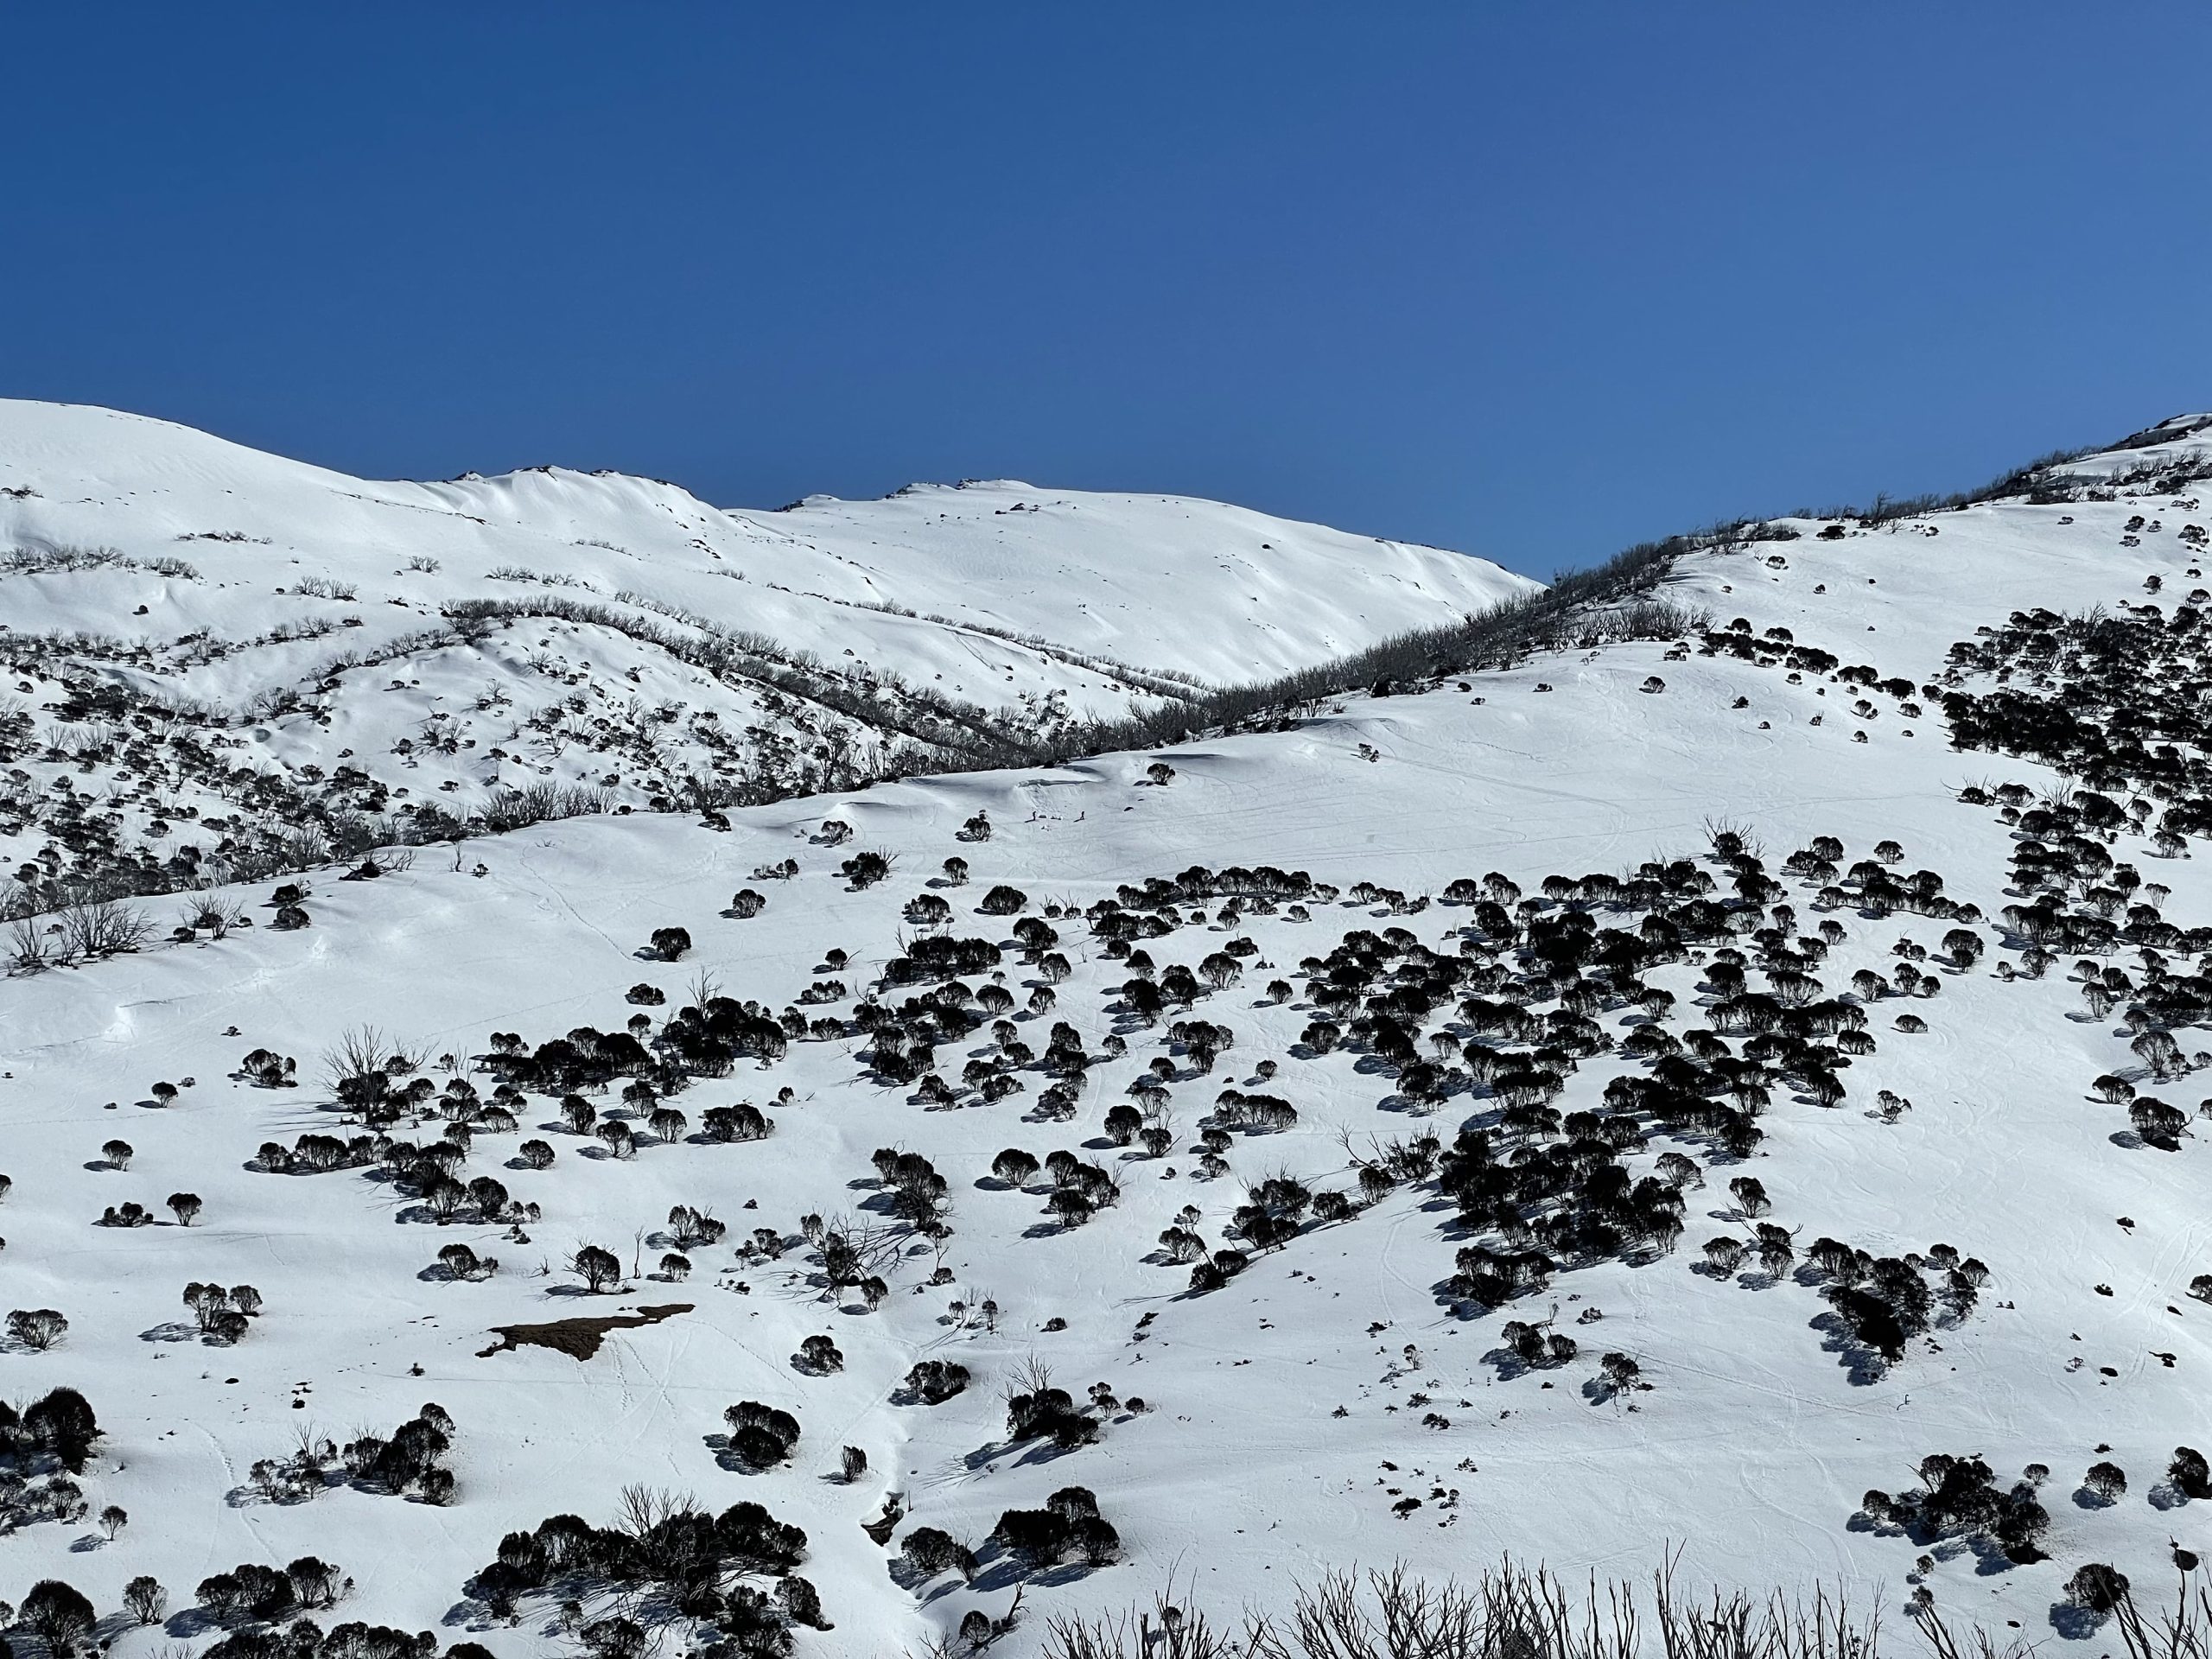 Body of 23-Year Old Backcountry Skier Found in Snowy Mountains, Australia